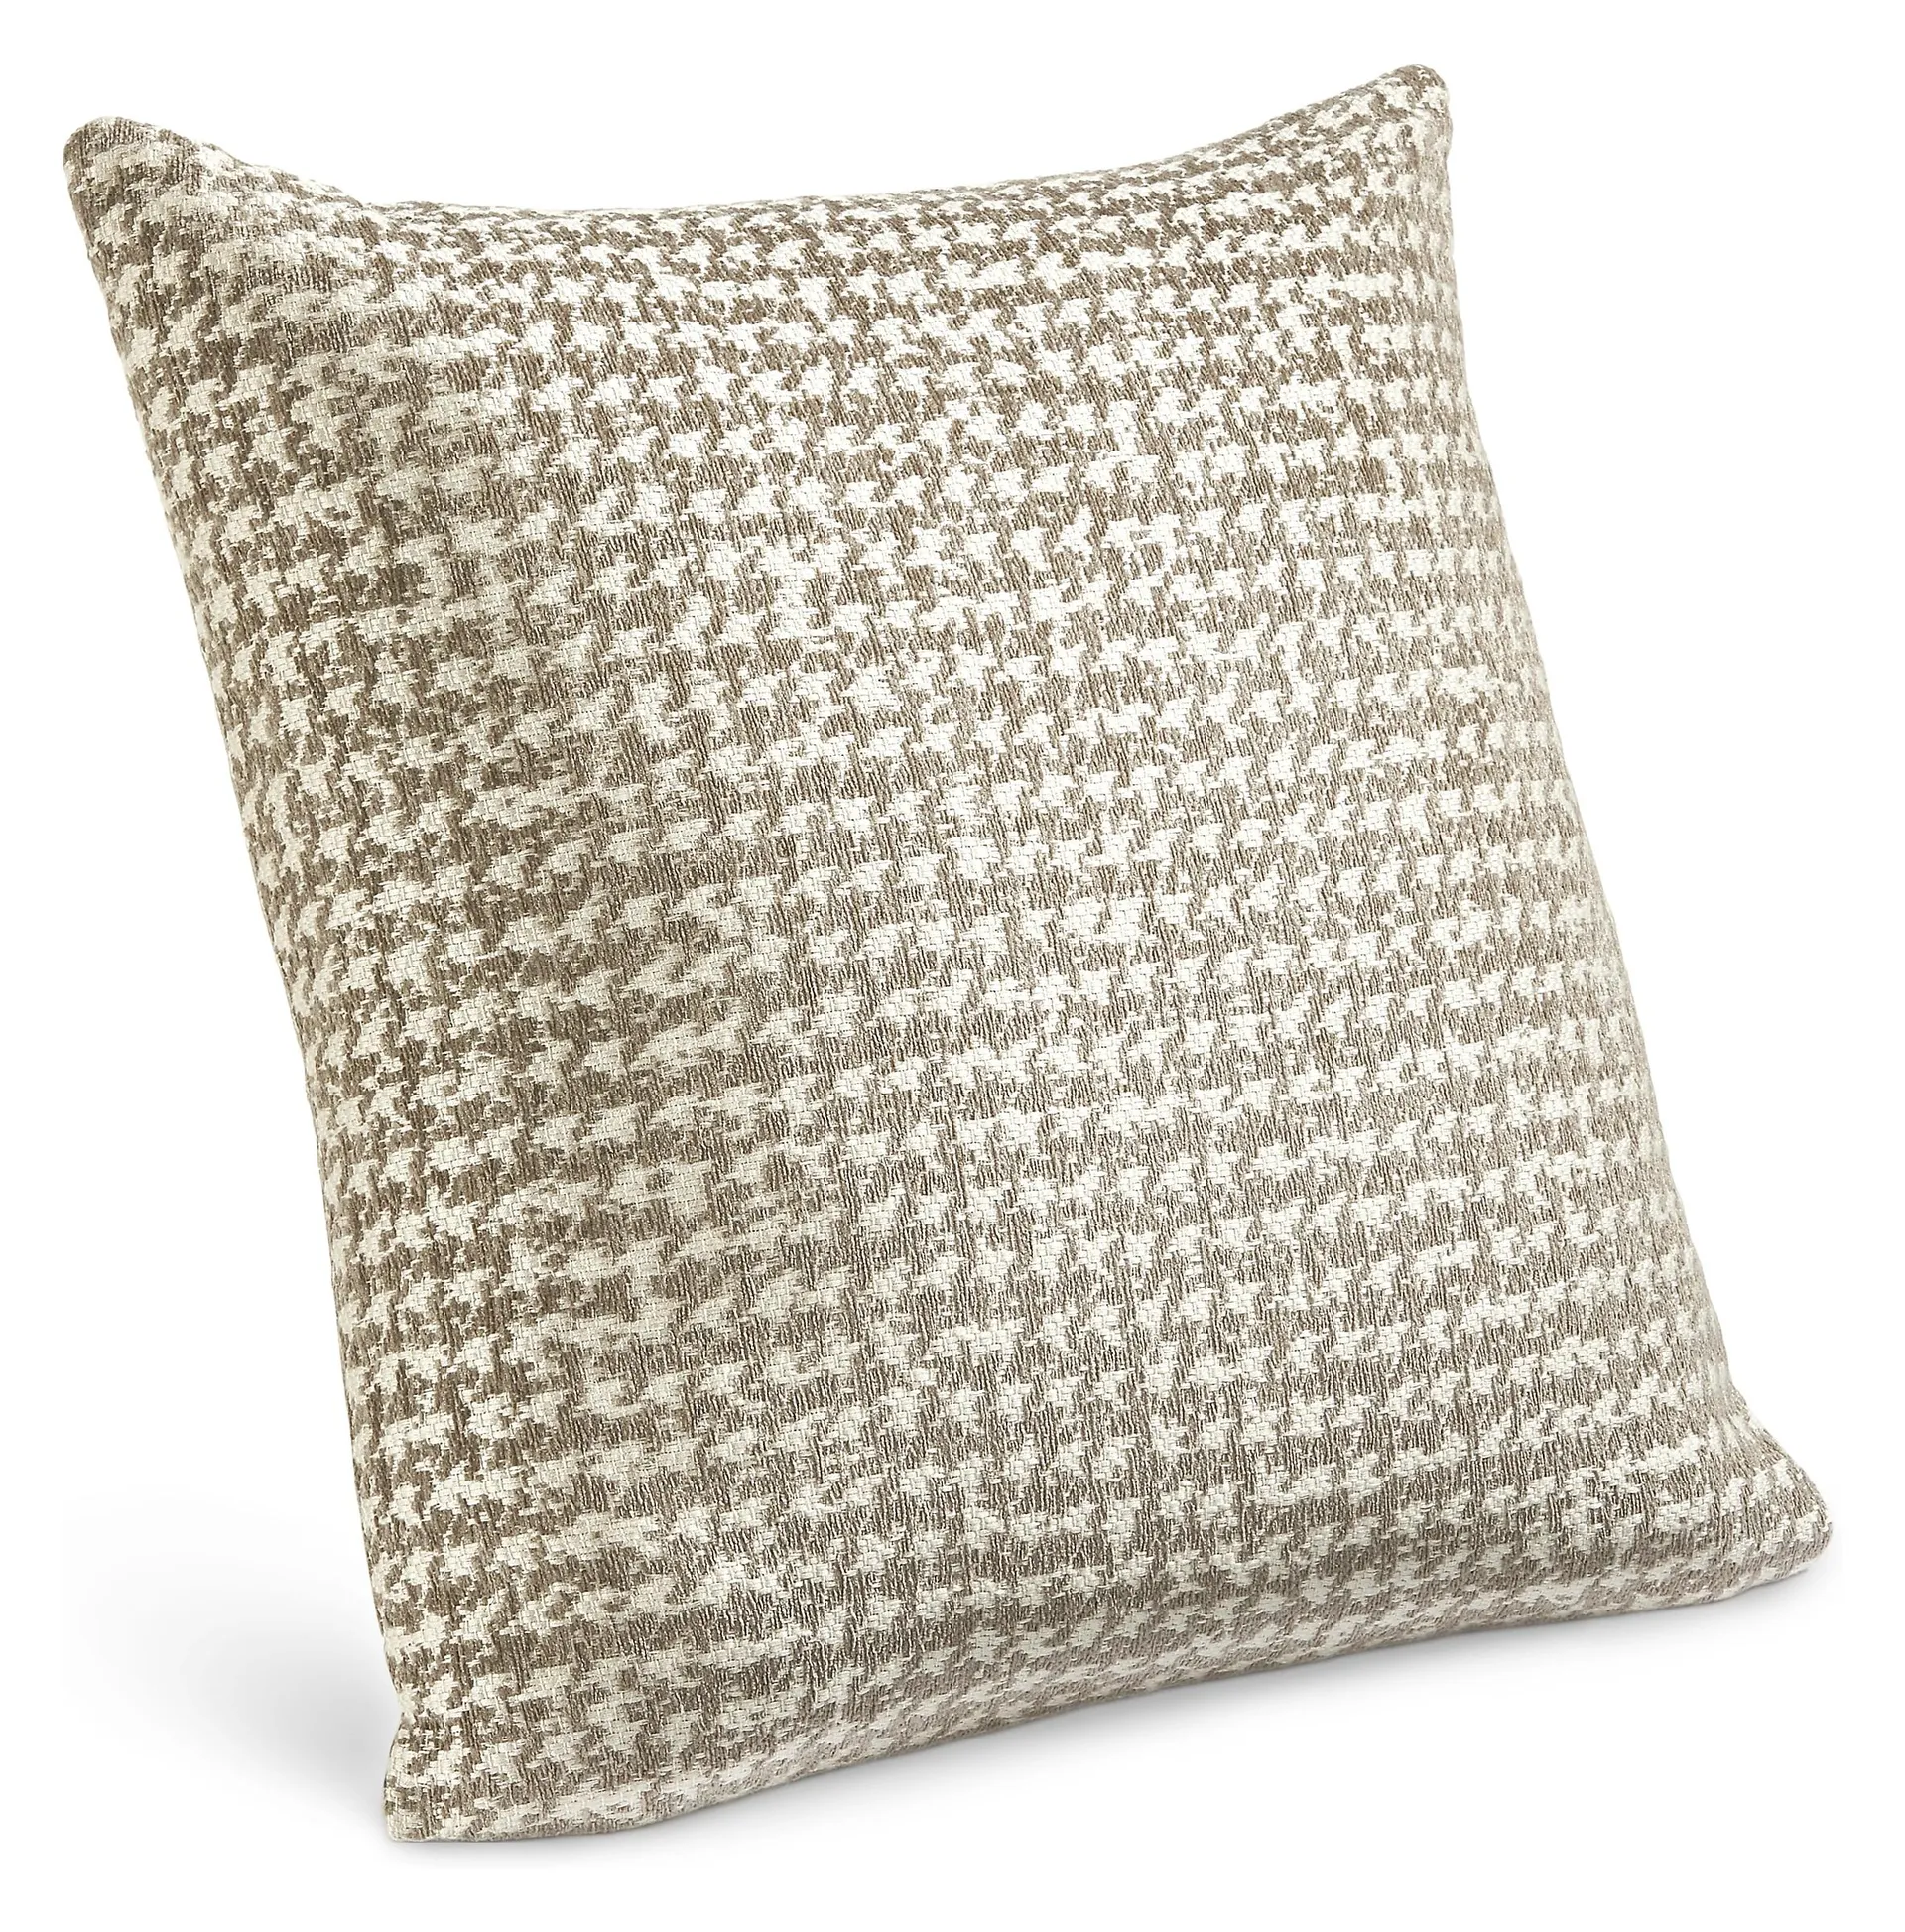 Barnes 20w 20h Throw Pillow Cover in Grey/White